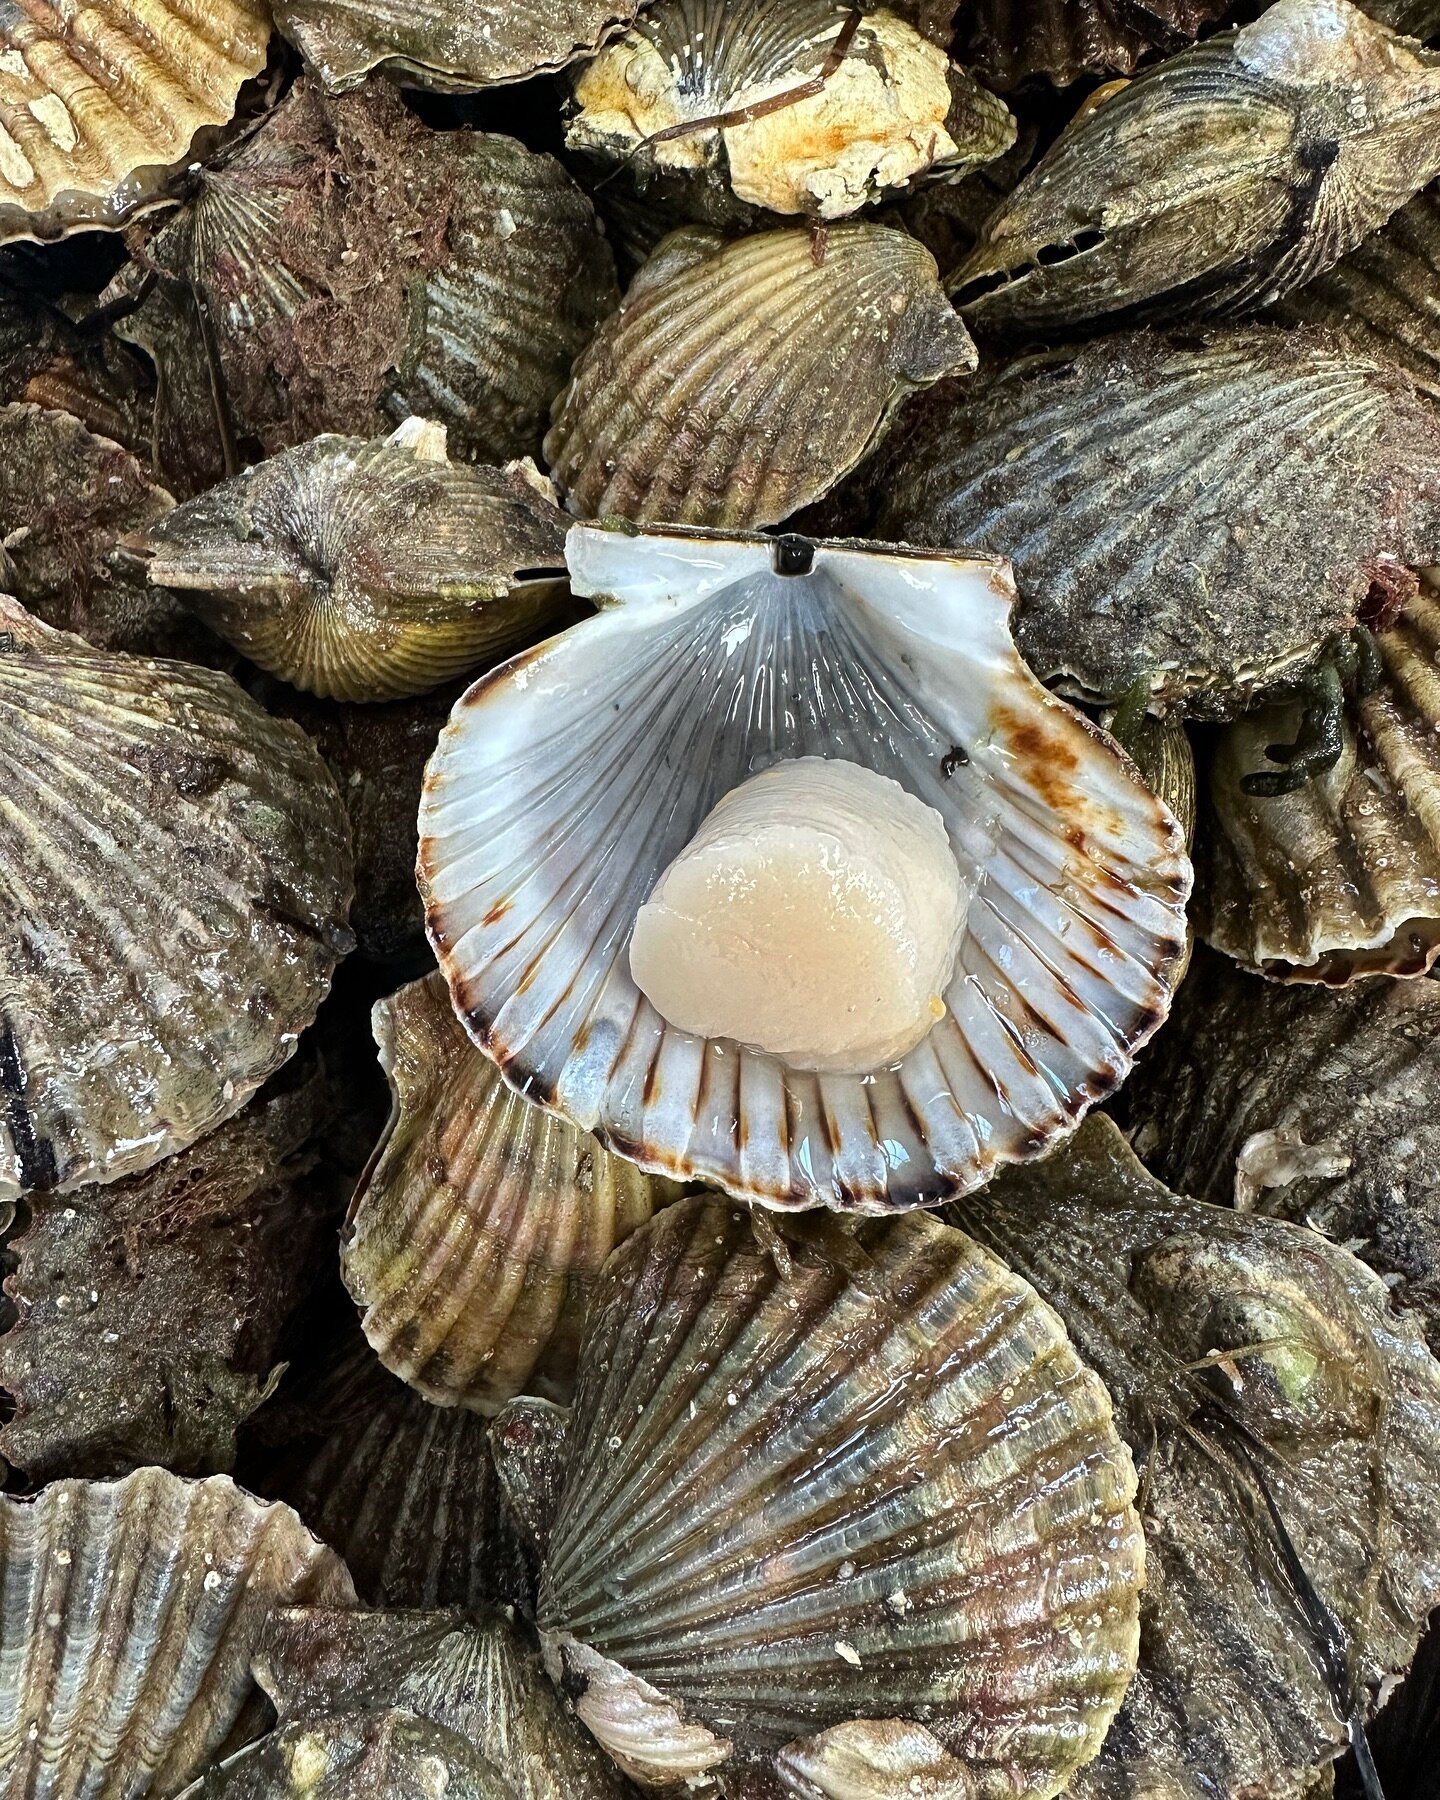 Our favorite thing about a Leap Year? An extra day of scallop season!! #nantucketbayscallops